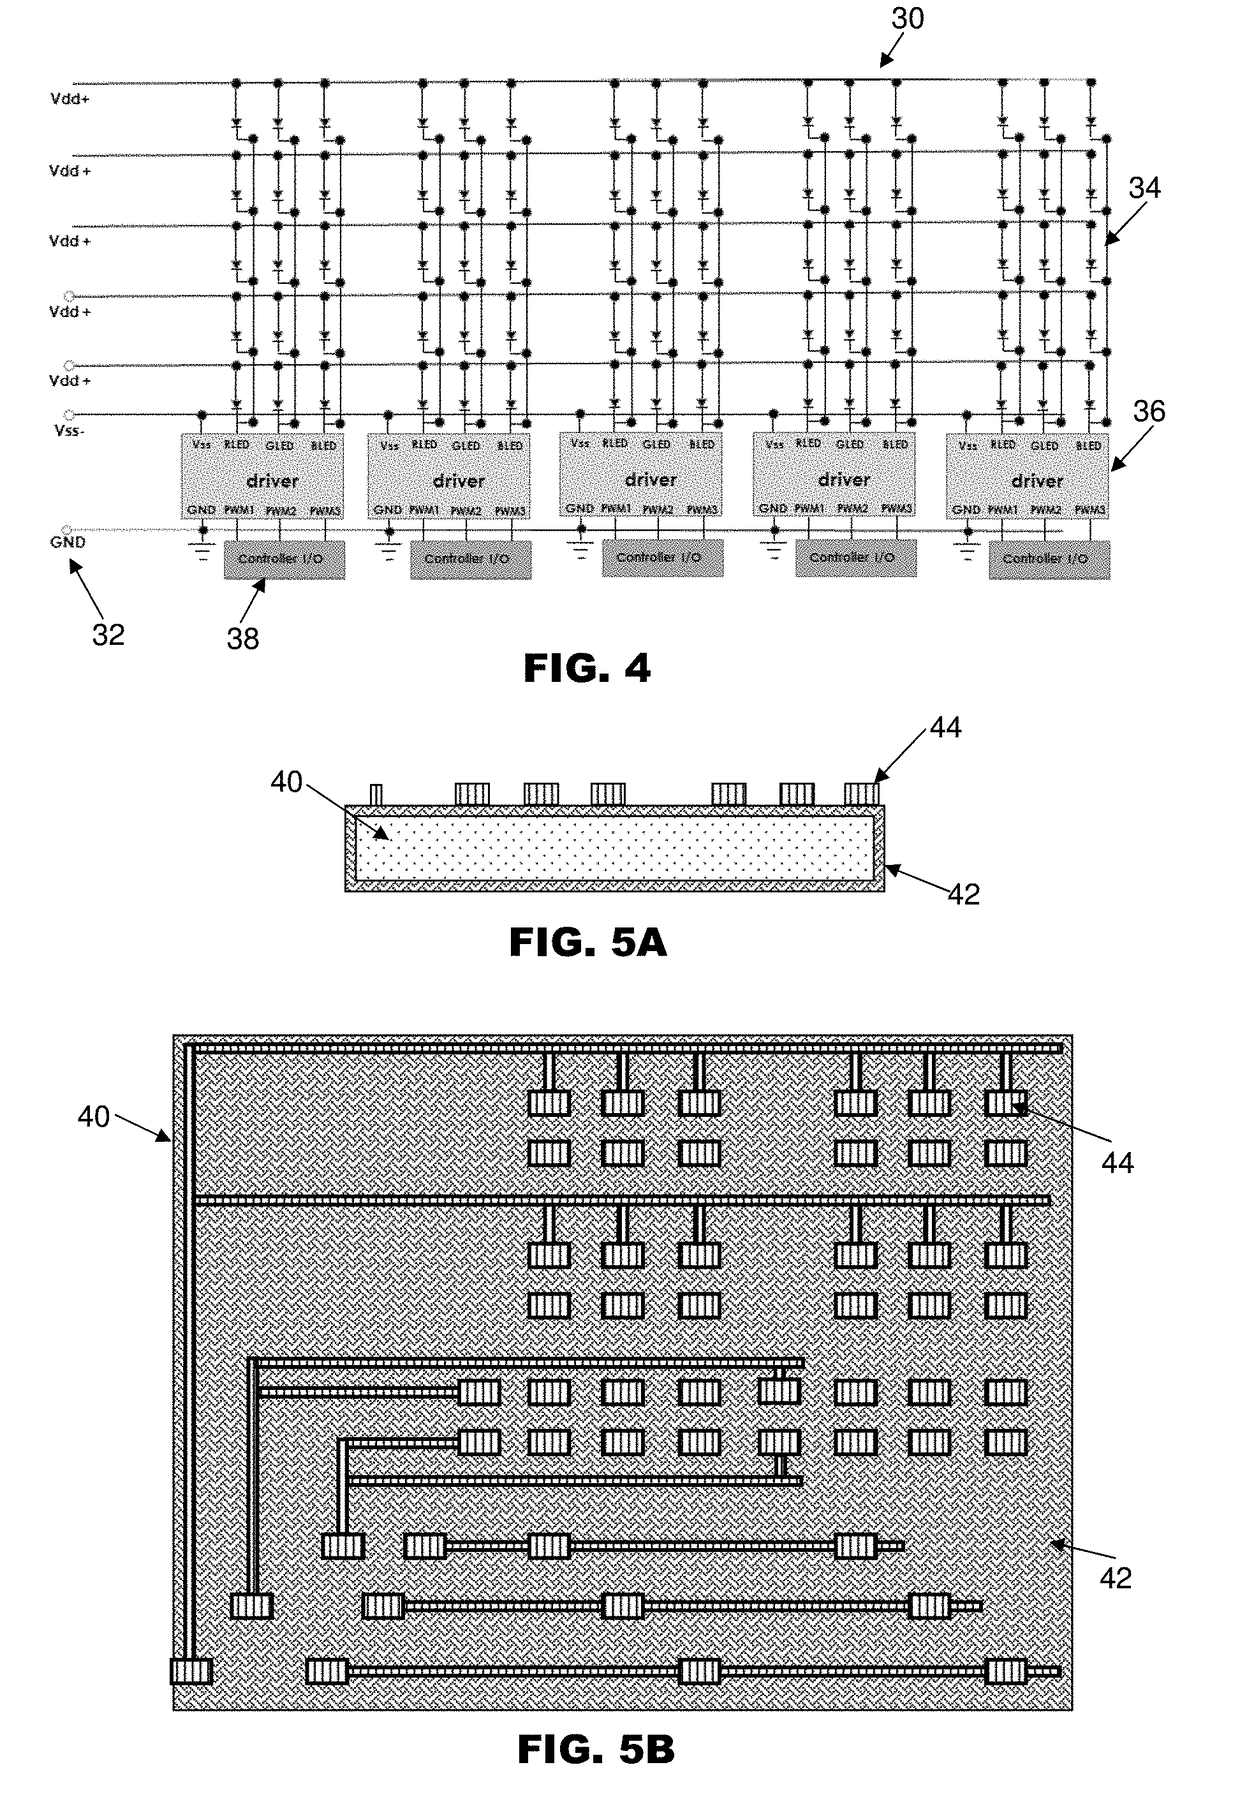 Display panel fabricated on a routable substrate